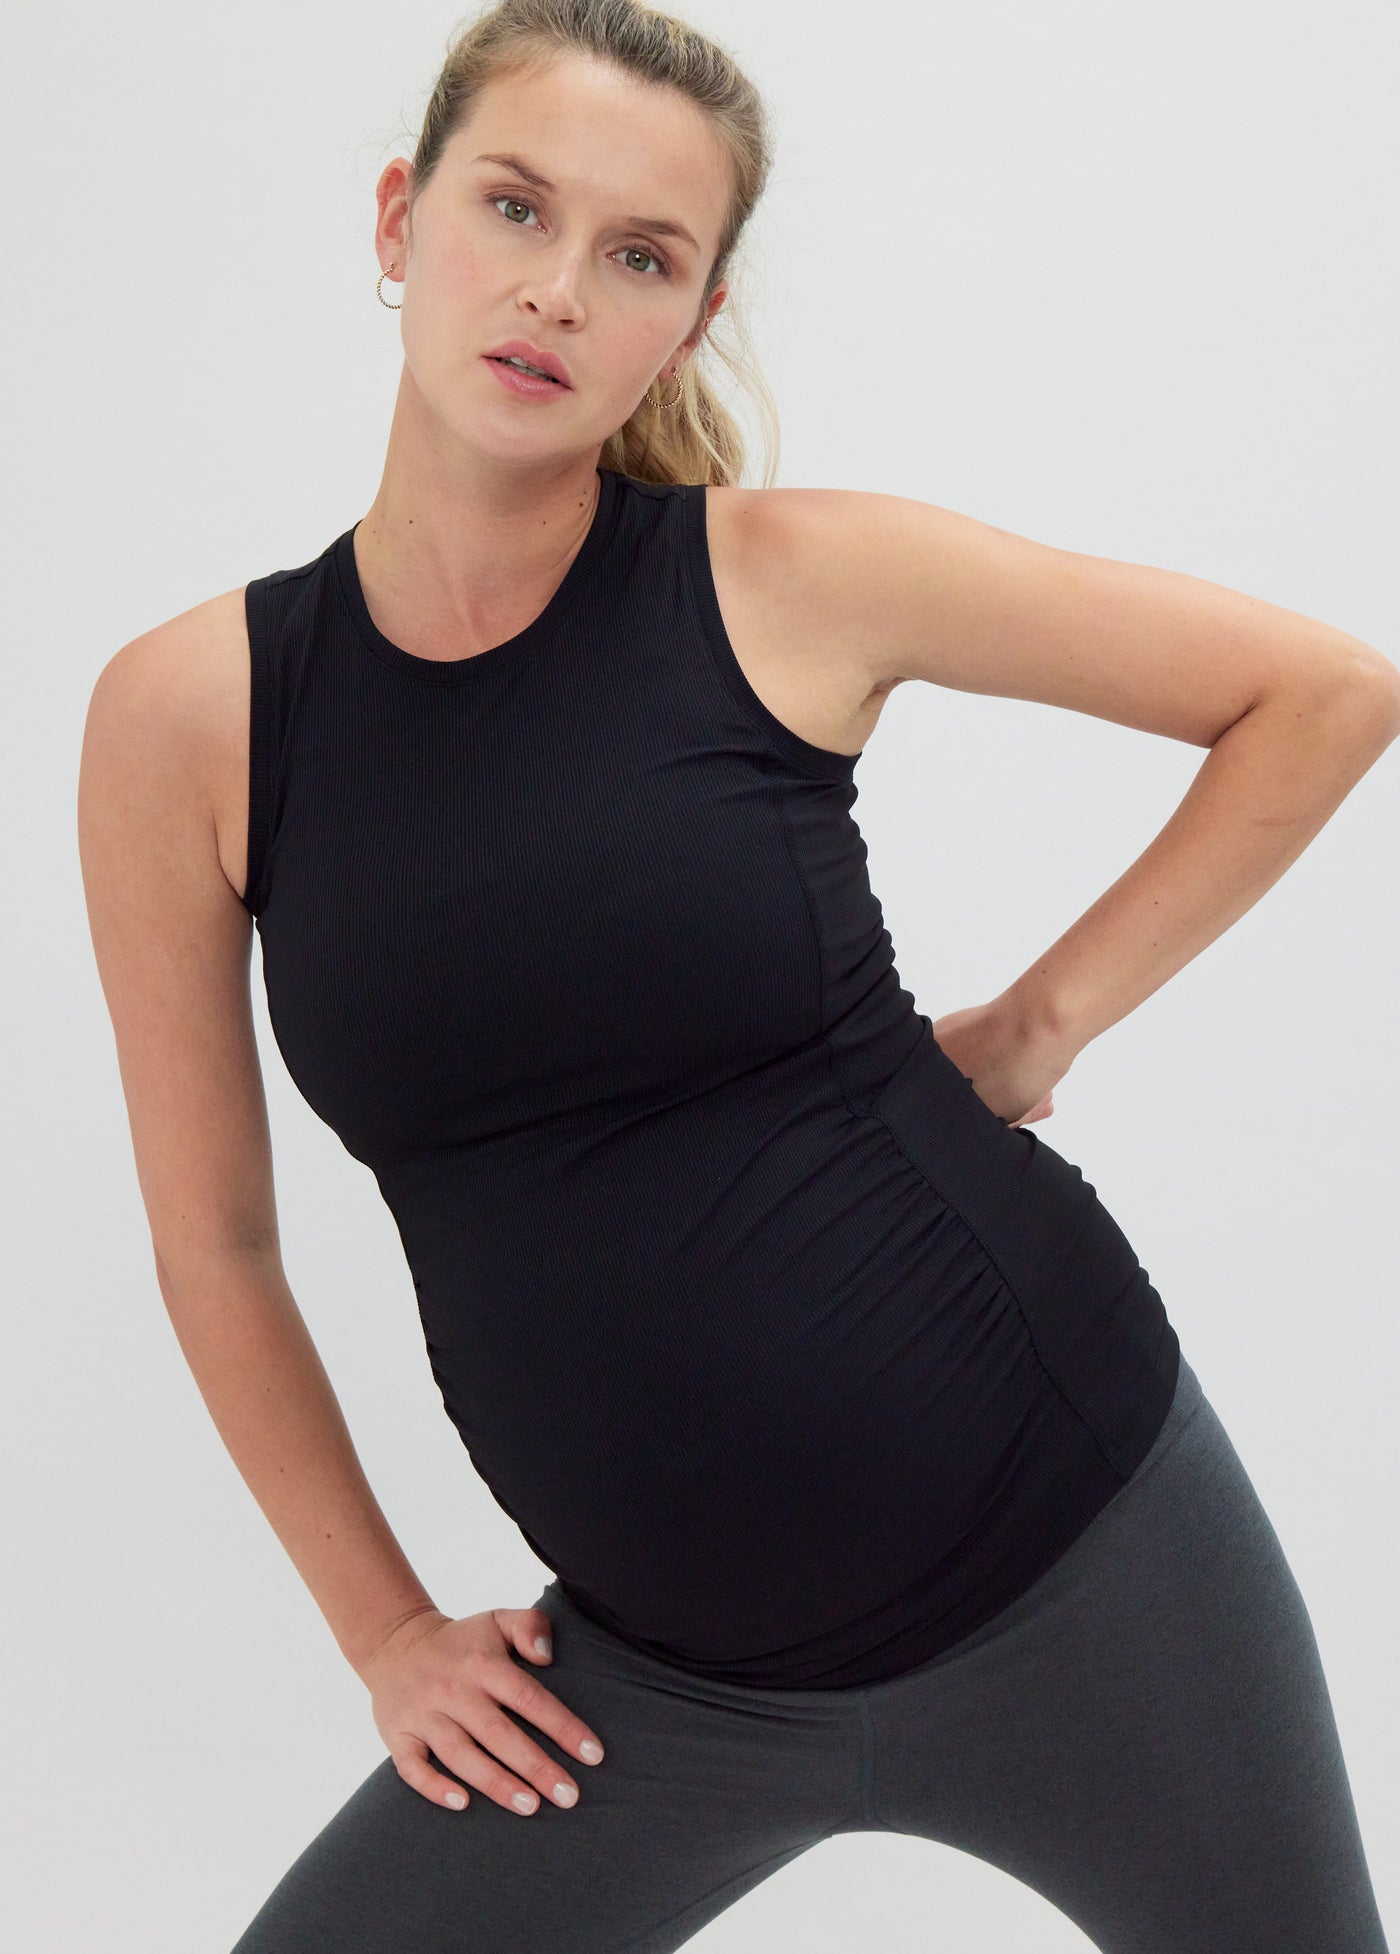 Svieta is 5 '10”, 31 weeks pregnant, and wearing a size medium||Black